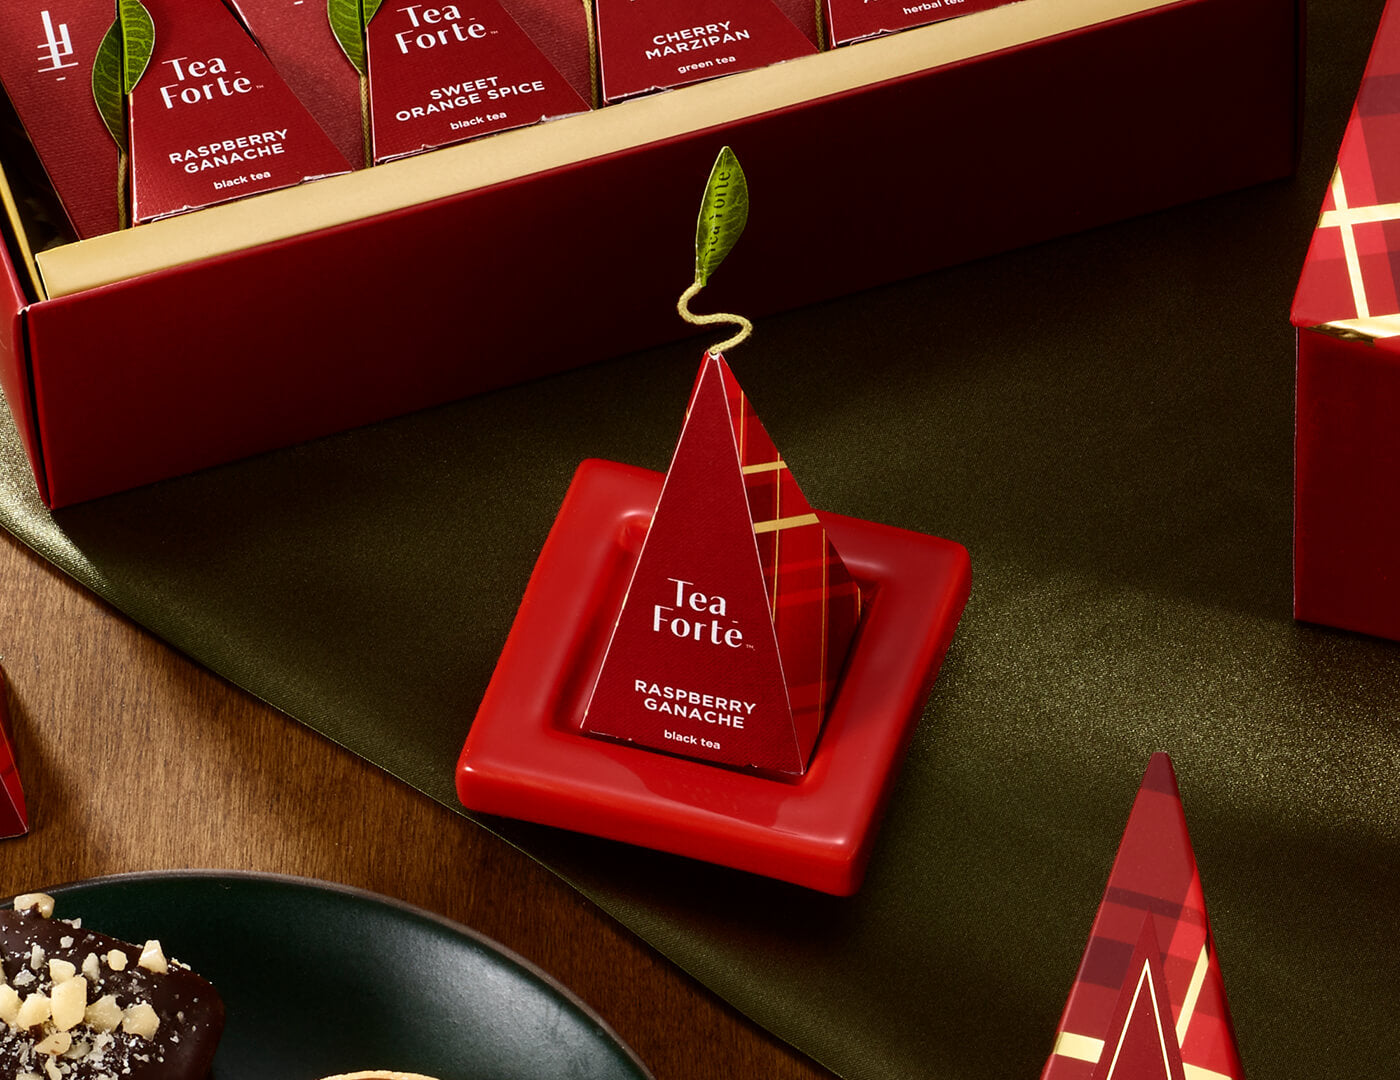 Ruby Red Tea Tray with infuser perched on top resting on festive table with a open box in background